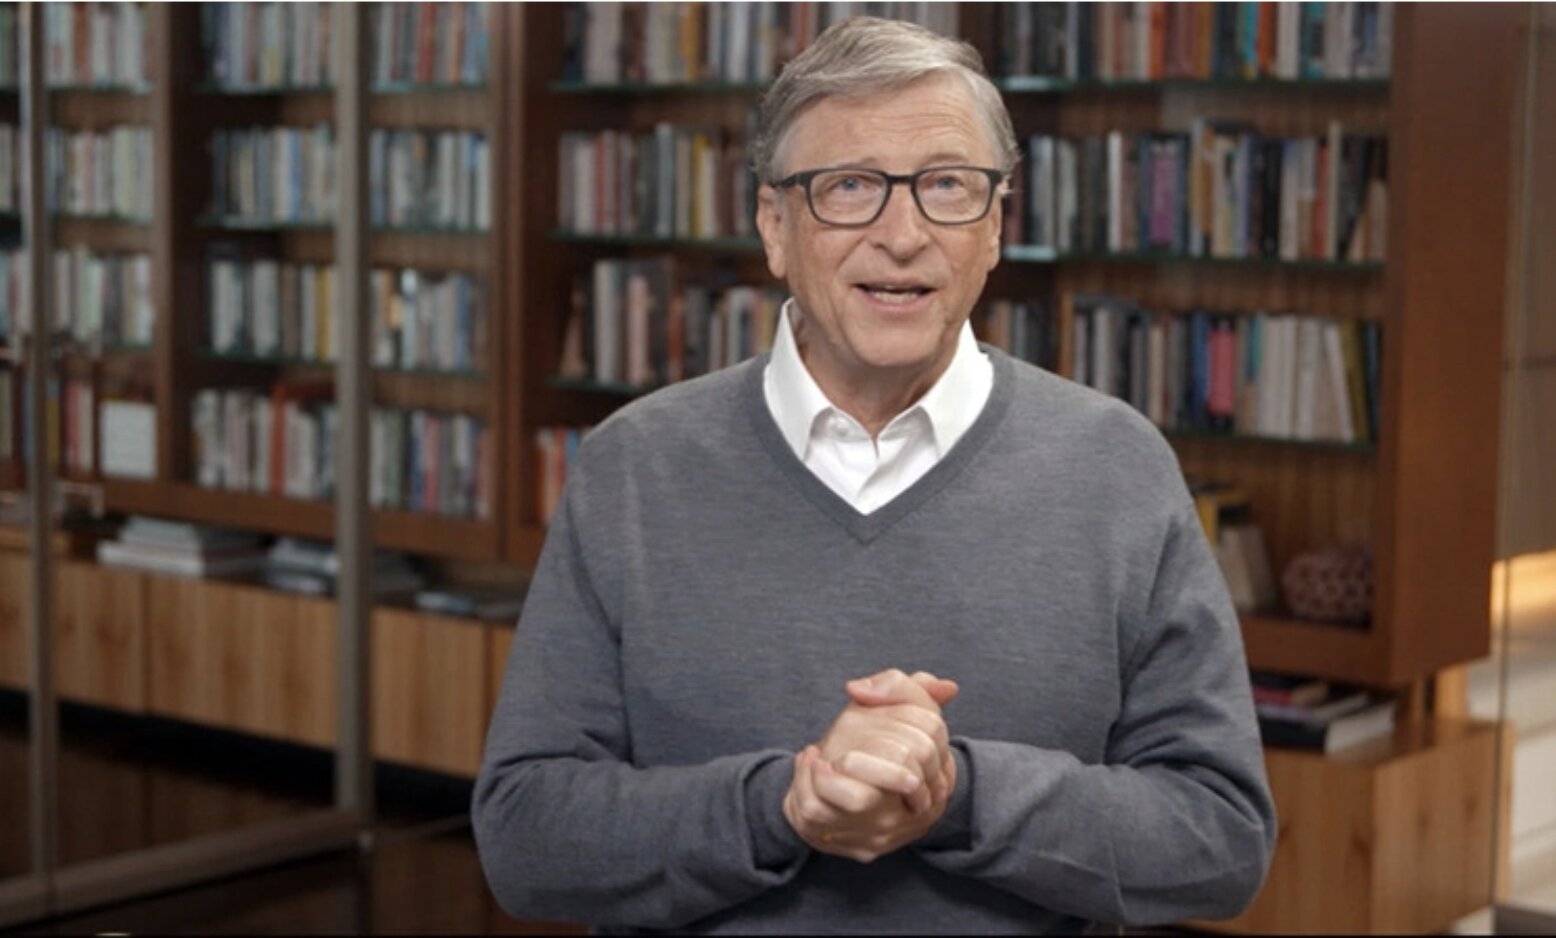 Watch Live: Bill Gates Admits Vaccines Are Not Safe During Nationally Televised Interview